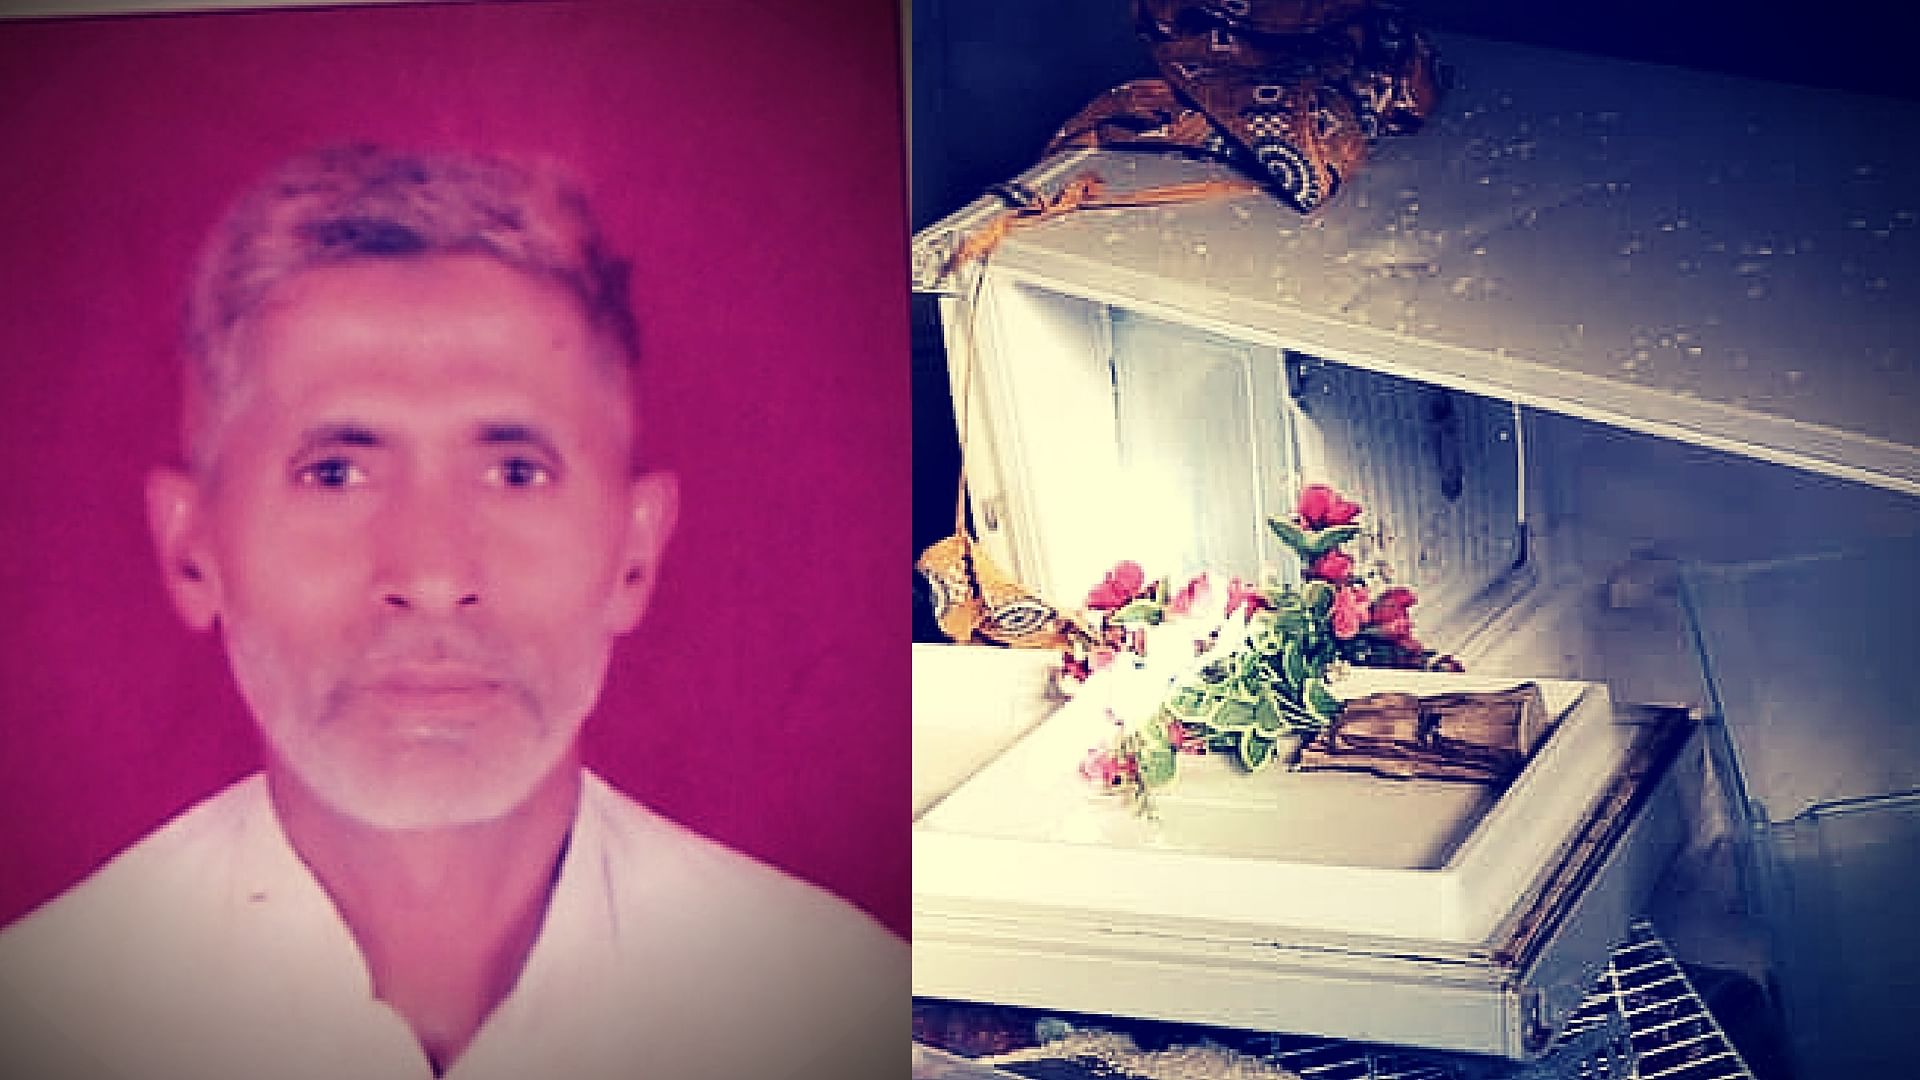 September 28, 2015: The mob first ransacked Mohammad Akhlaq’s fridge and turned murderous after finding leftover meat from Eid. (Photo: The Quint)